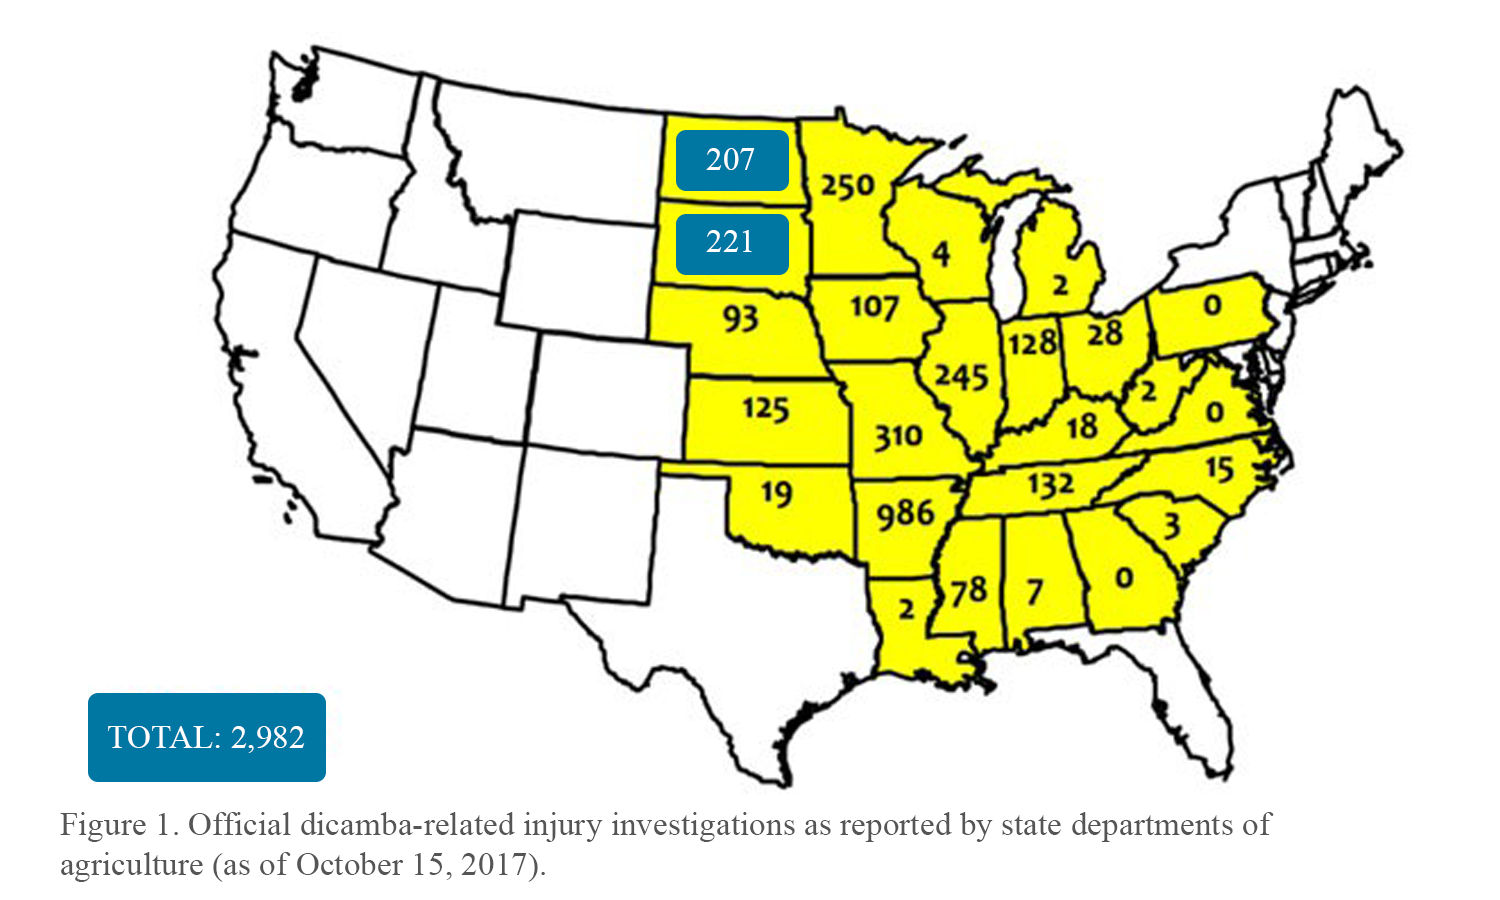 Figure 1: Official dicamba-related injury investigations as reported by state departments of agriculture as of October 15, 2017. South Dakota updated from 114 to 221 complaints. North Dakota updated from 40 to 207 complaints. The additional 274 complaints in ND and SD raise the original total of 2,708 complaints to a new total of 2,982.